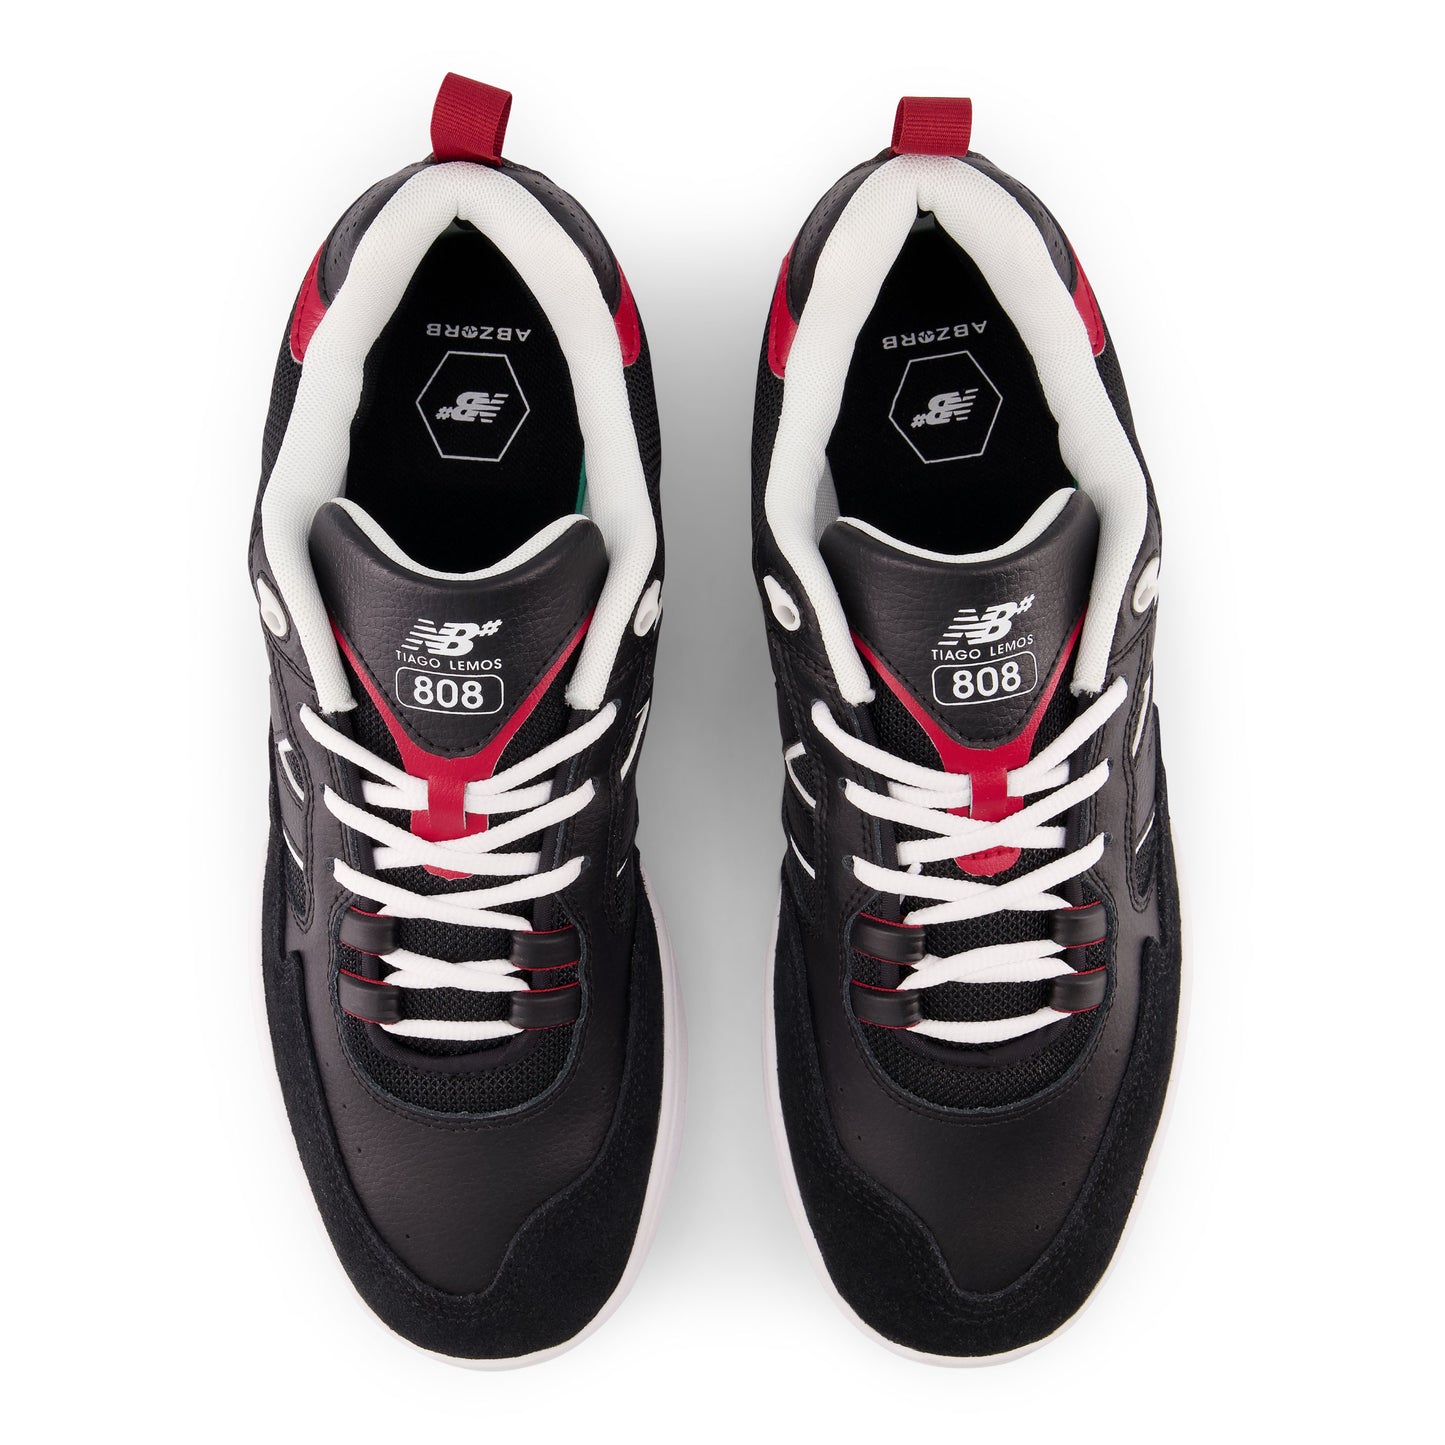 New Balance Numeric 'Tiago 808' Skate Shoes (Black / Red)